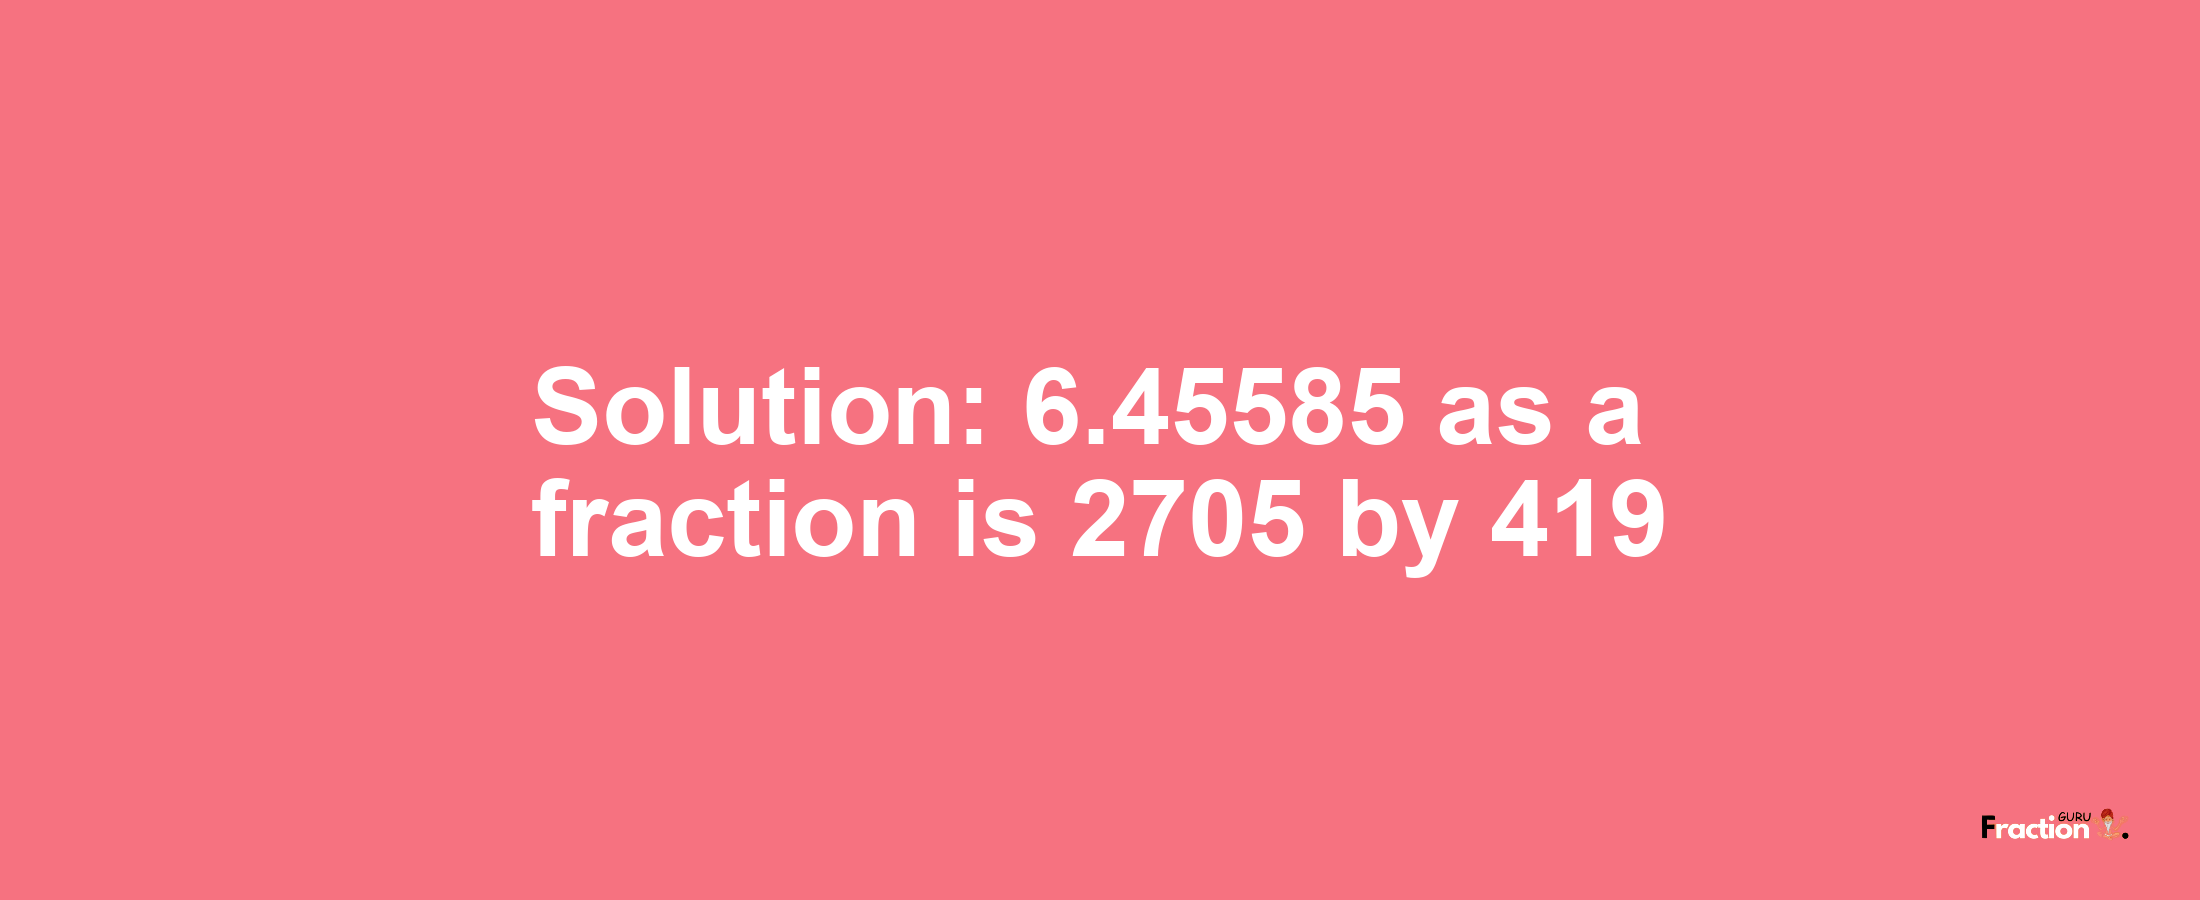 Solution:6.45585 as a fraction is 2705/419